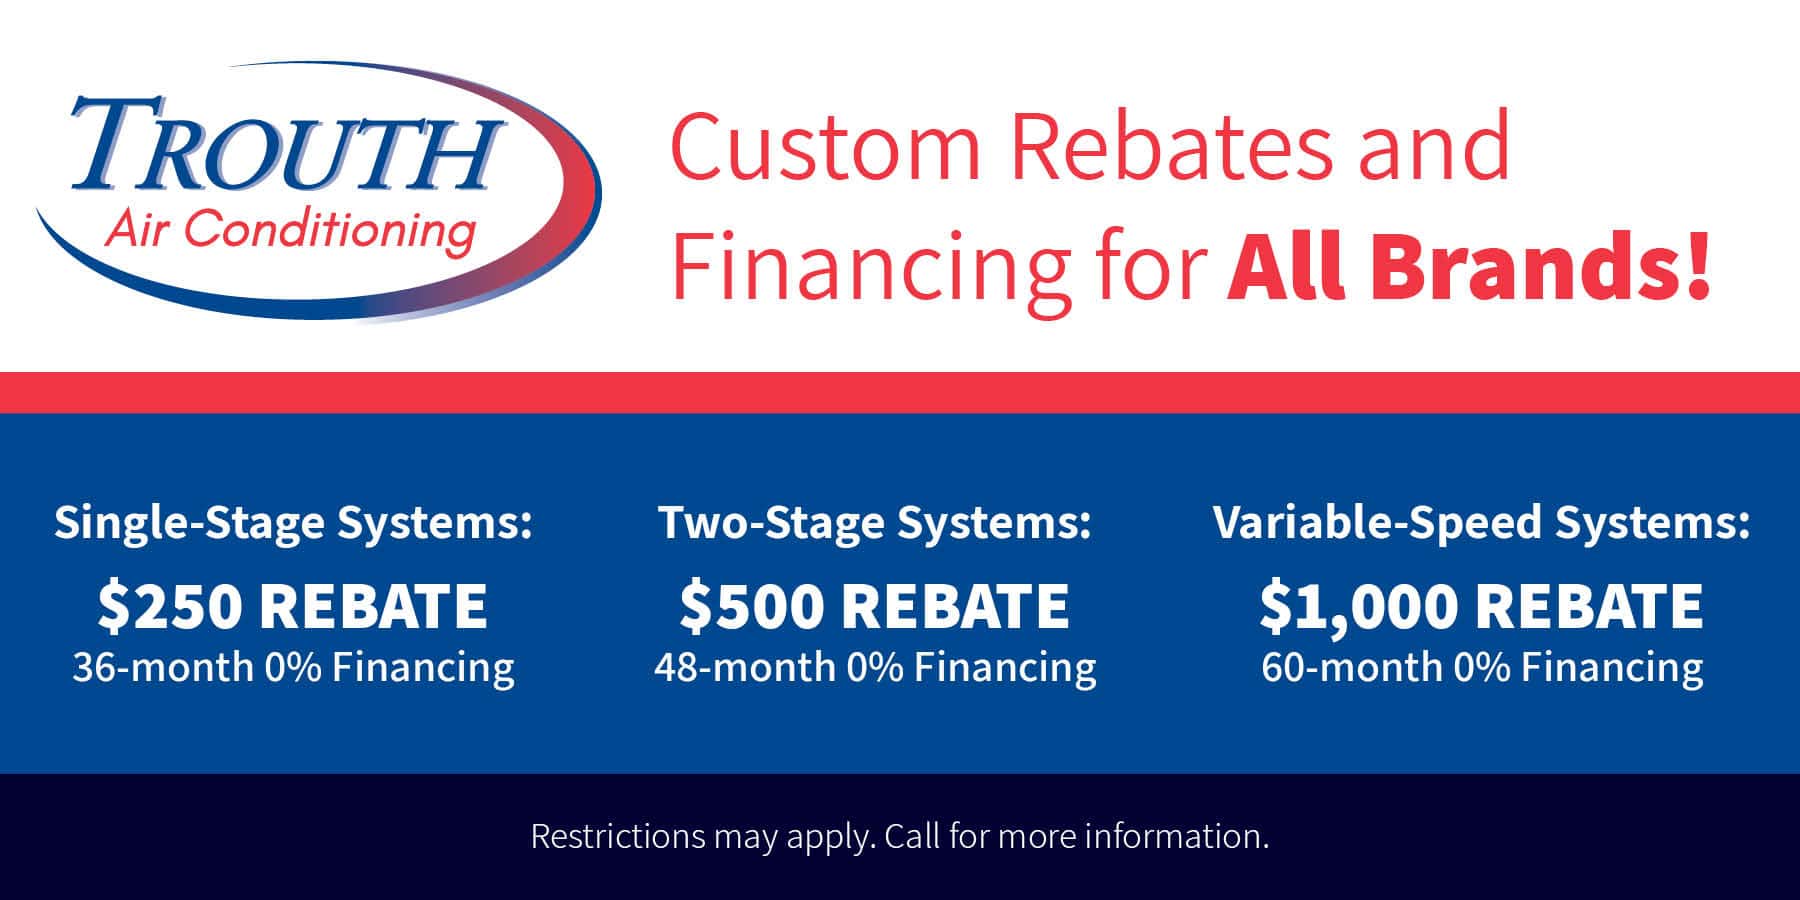 Special for Trouth stating that there are custom rebates and financing for all brands.